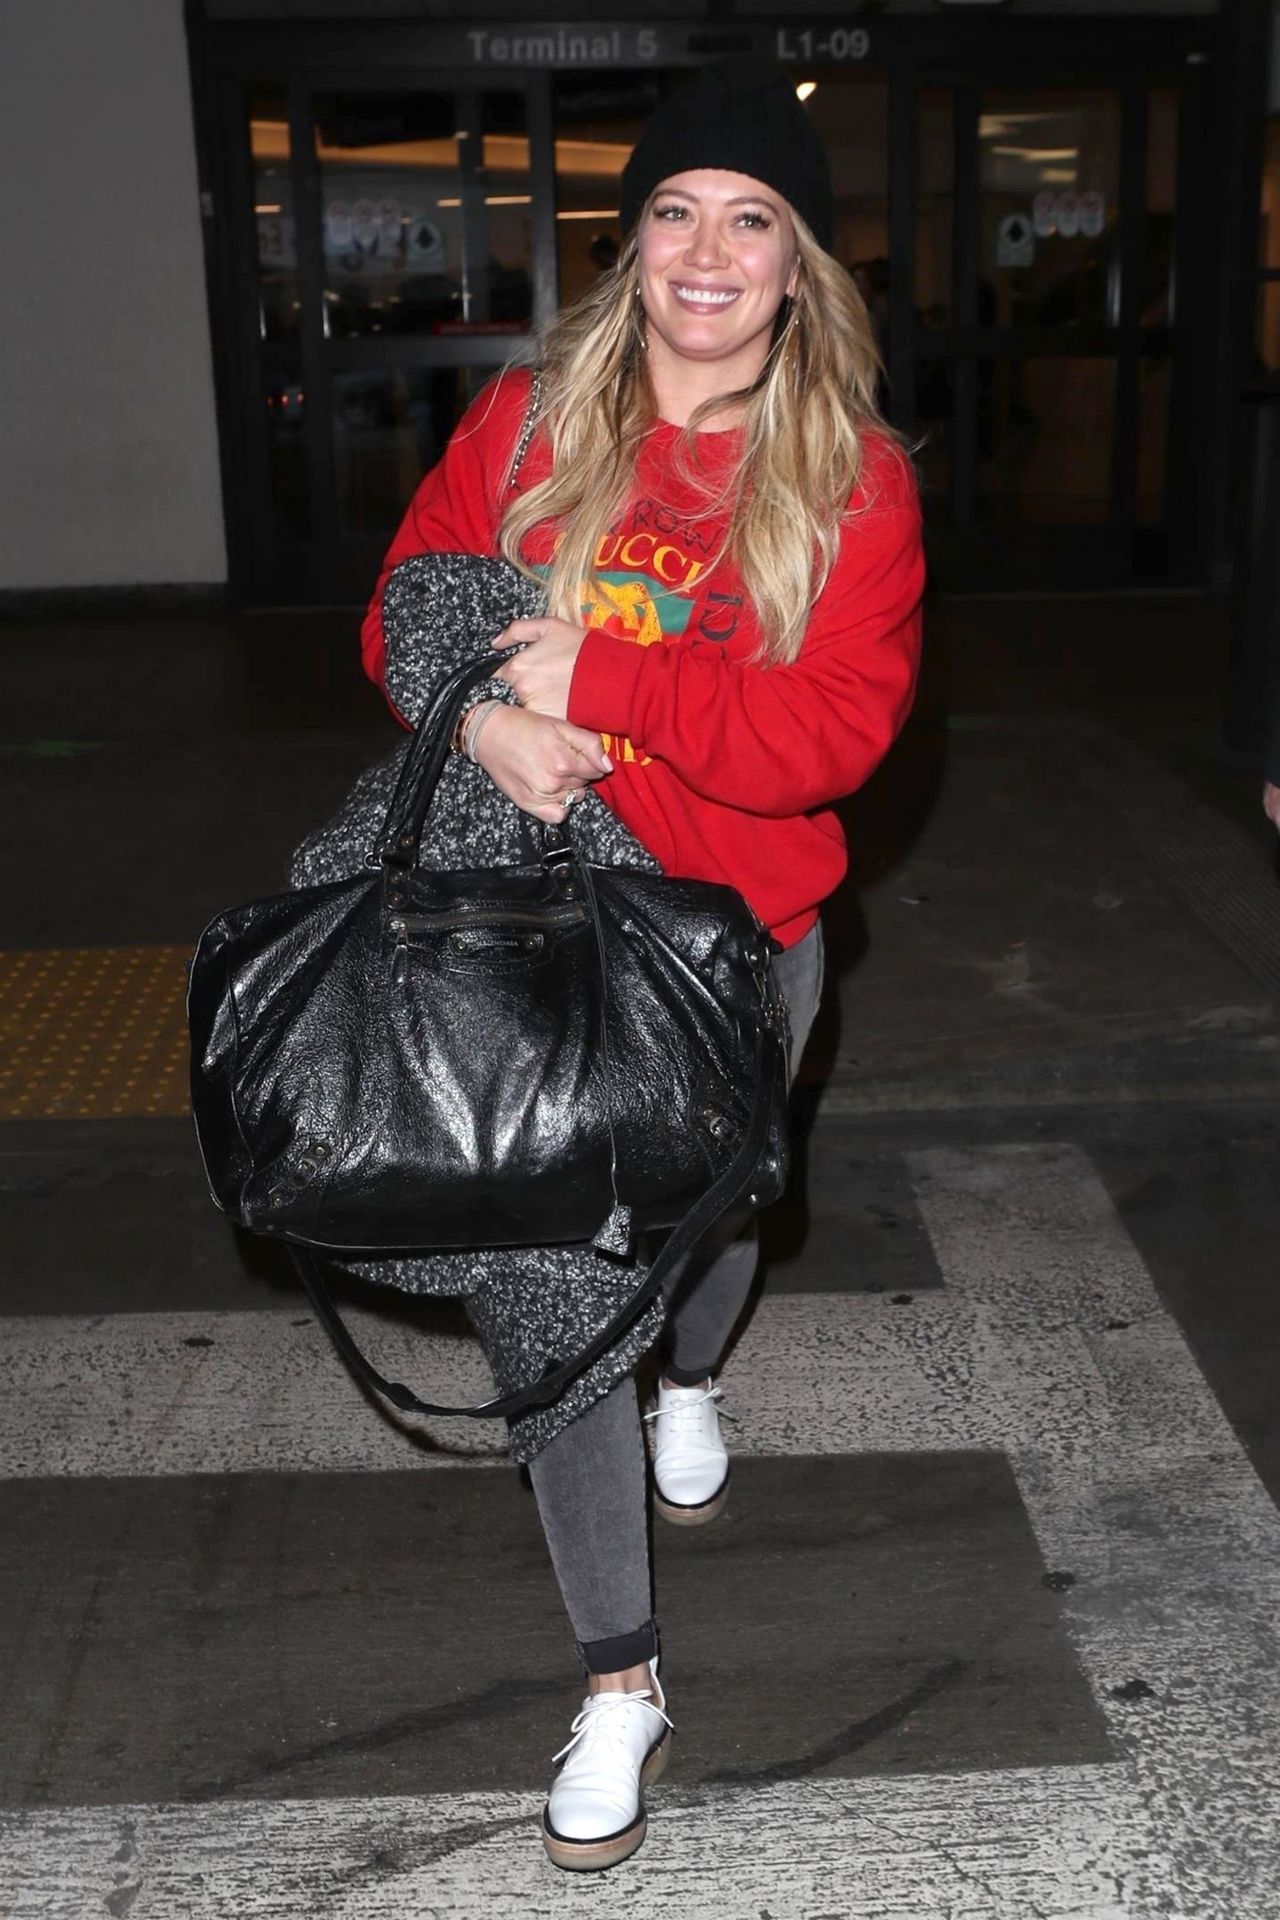 Hilary Duff at LAX Airport, September 29, 2016 – Star Style